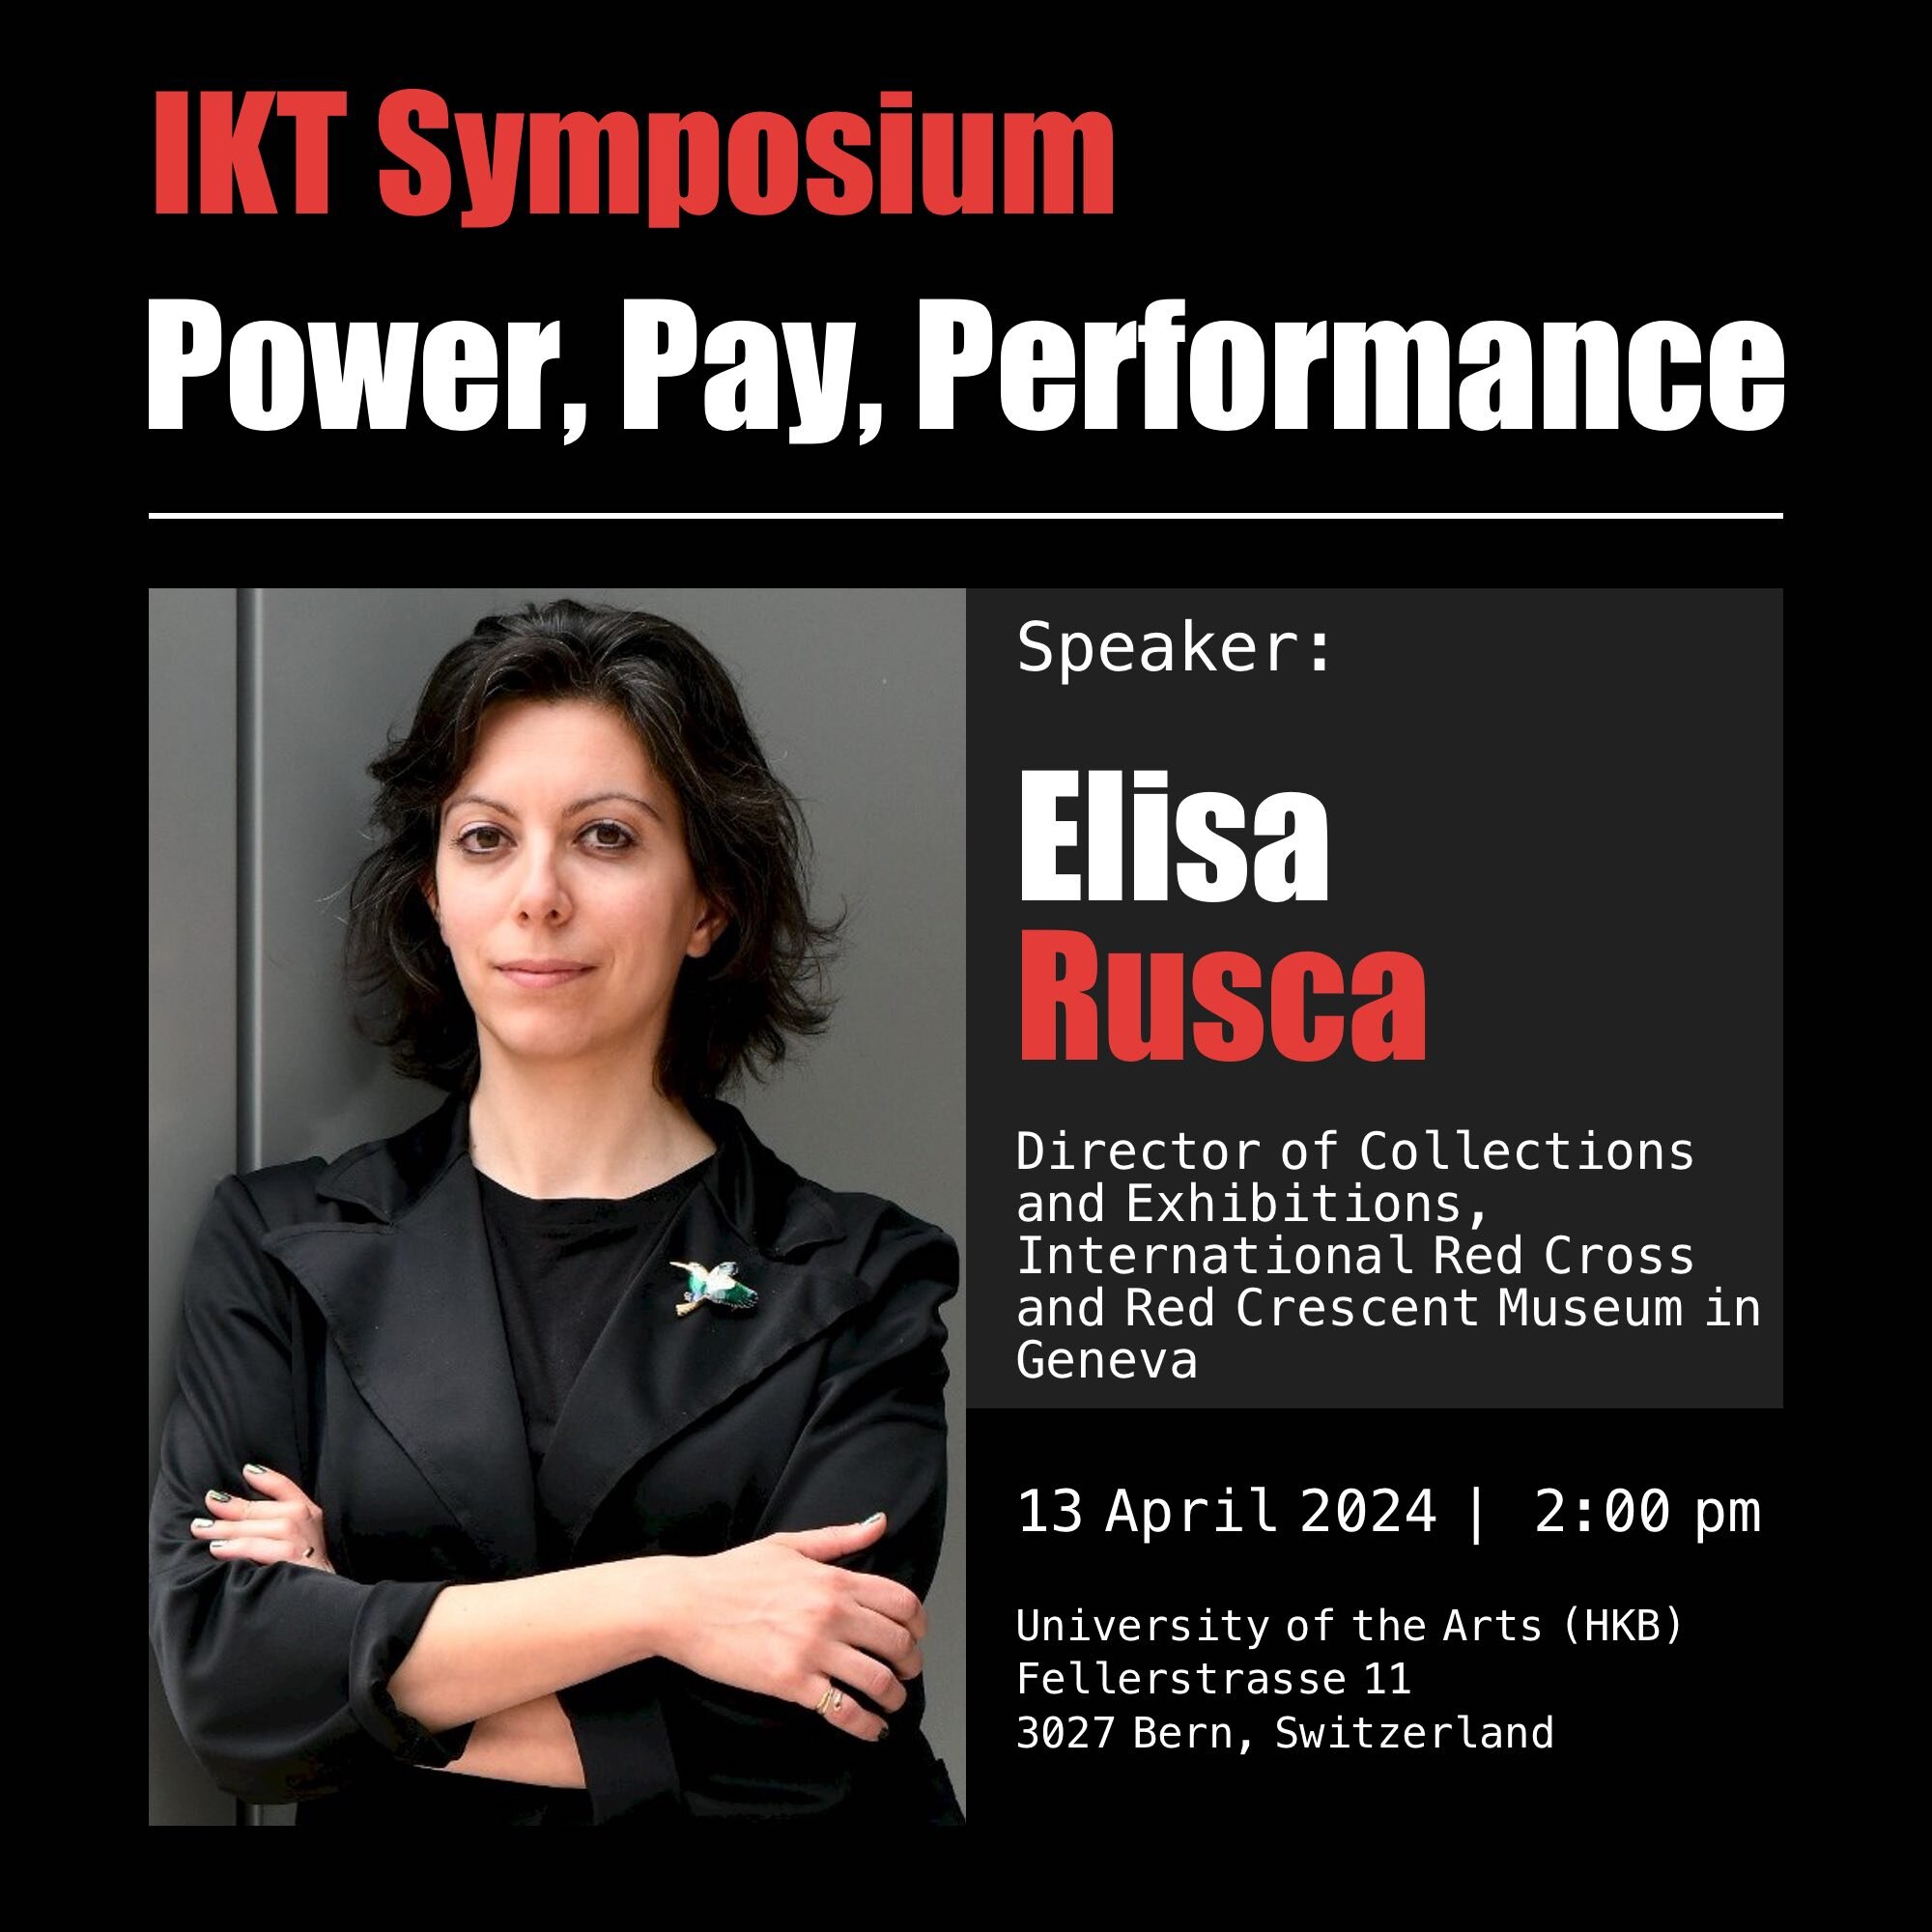 Meet IKT Symposium Speaker: Elisa Rusca

Join us at the IKT Symposium 2024 on April 13th at 2:00 pm to hear from Elisa Rusca, Director of Collections and Exhibitions at the International Red Cross and Red Crescent Museum in Geneva. With a distinguish